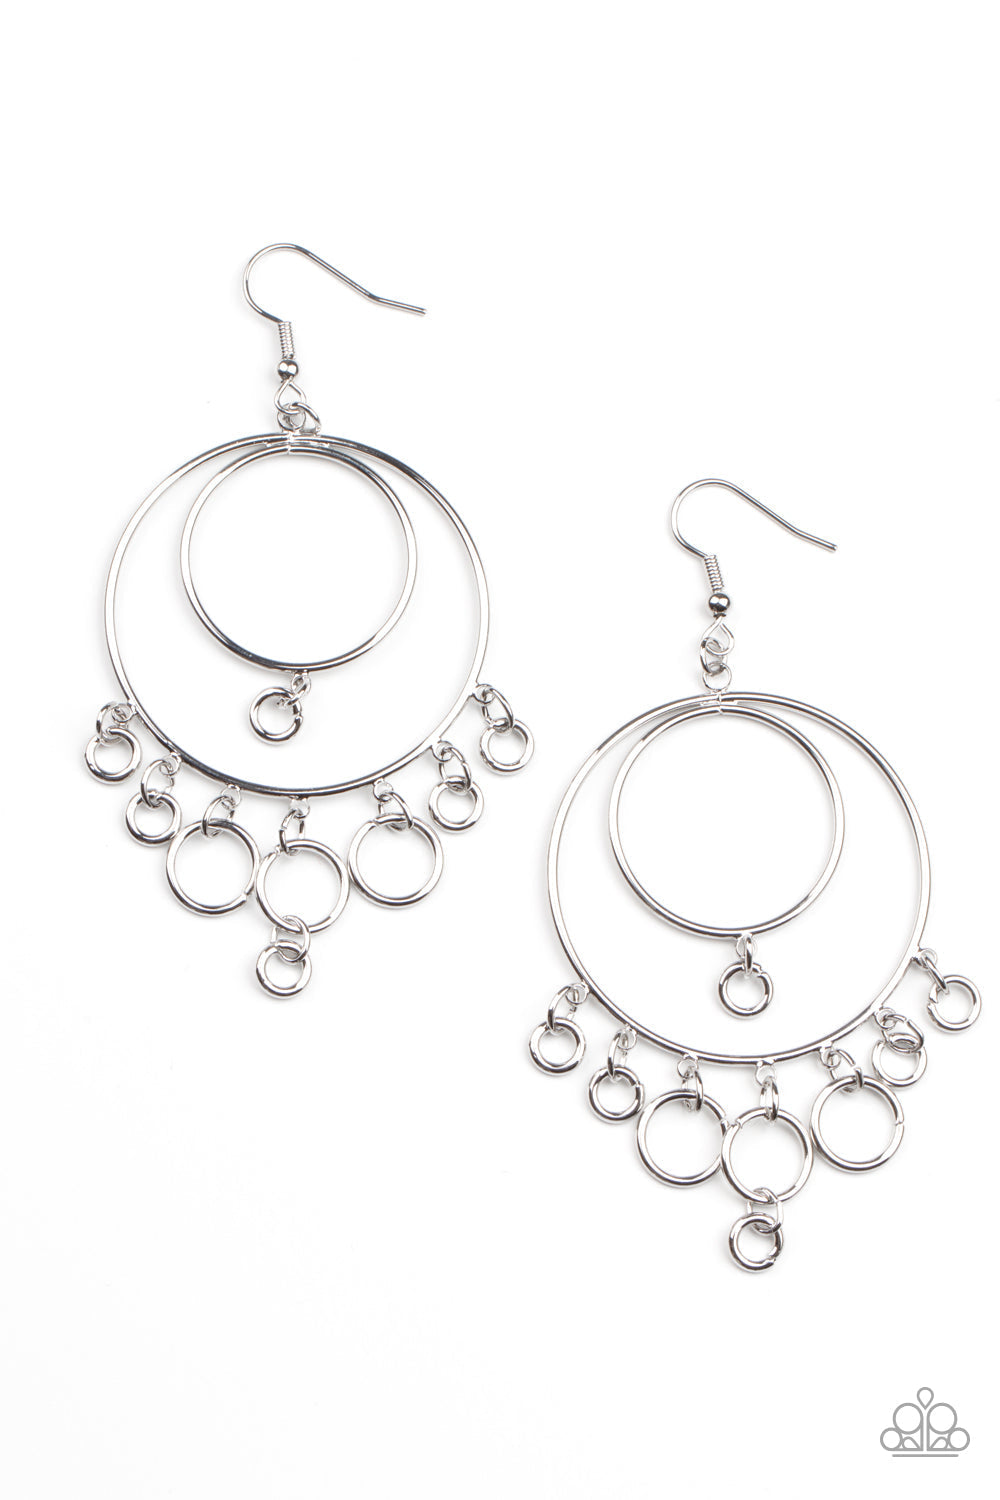 Roundabout Radiance - Silver Fringe Earrings - Paparazzi Accessories - A dainty collection of silver rings swing from the bottom of interconnected silver hoops, creating a dizzying fringe. Earring attaches to a standard fishhook fitting. Sold as one pair of earrings. 